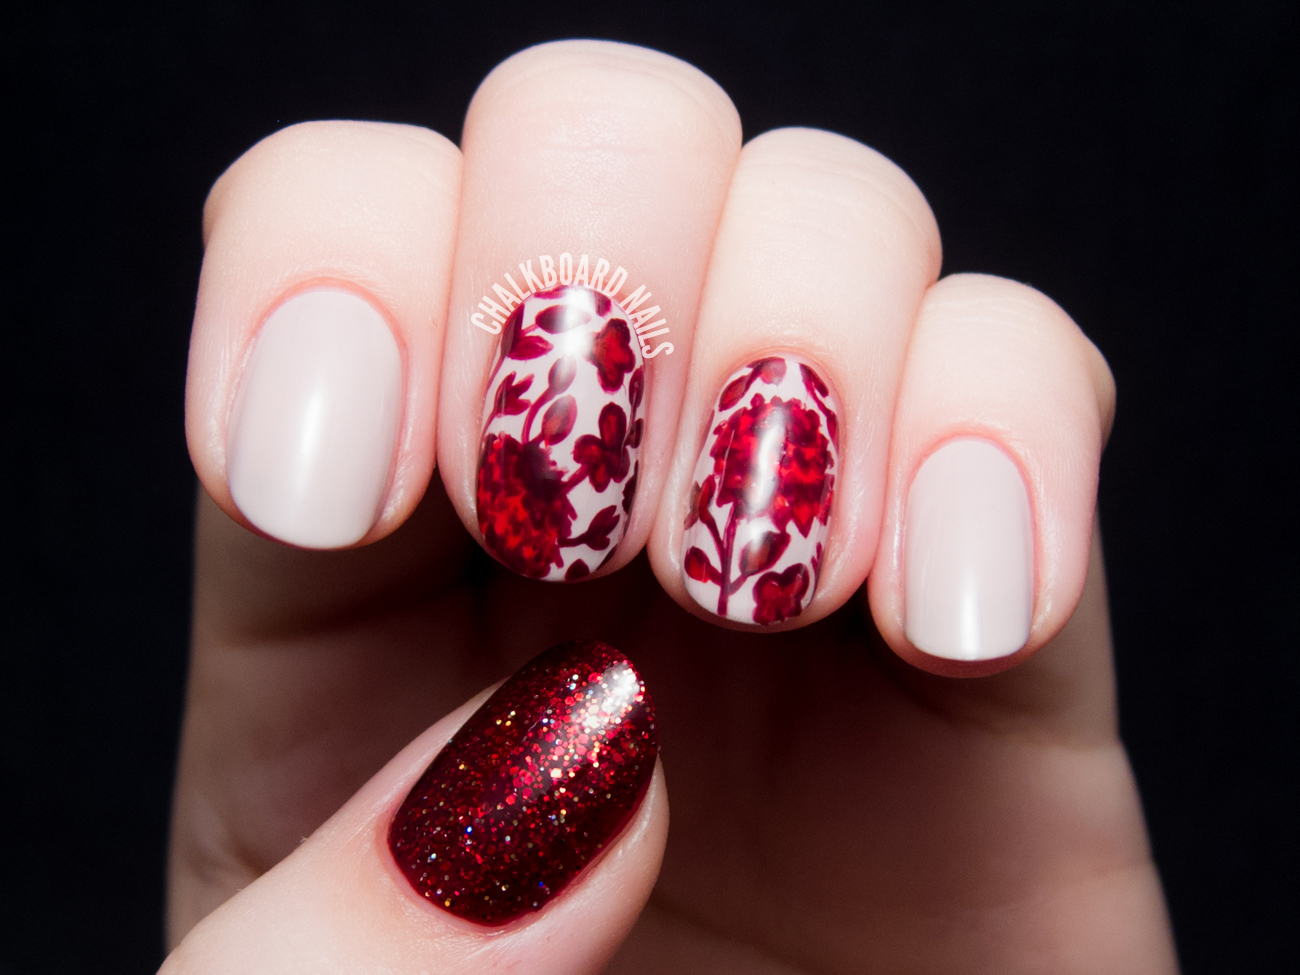 Ruby red floral by @chalkboardnails